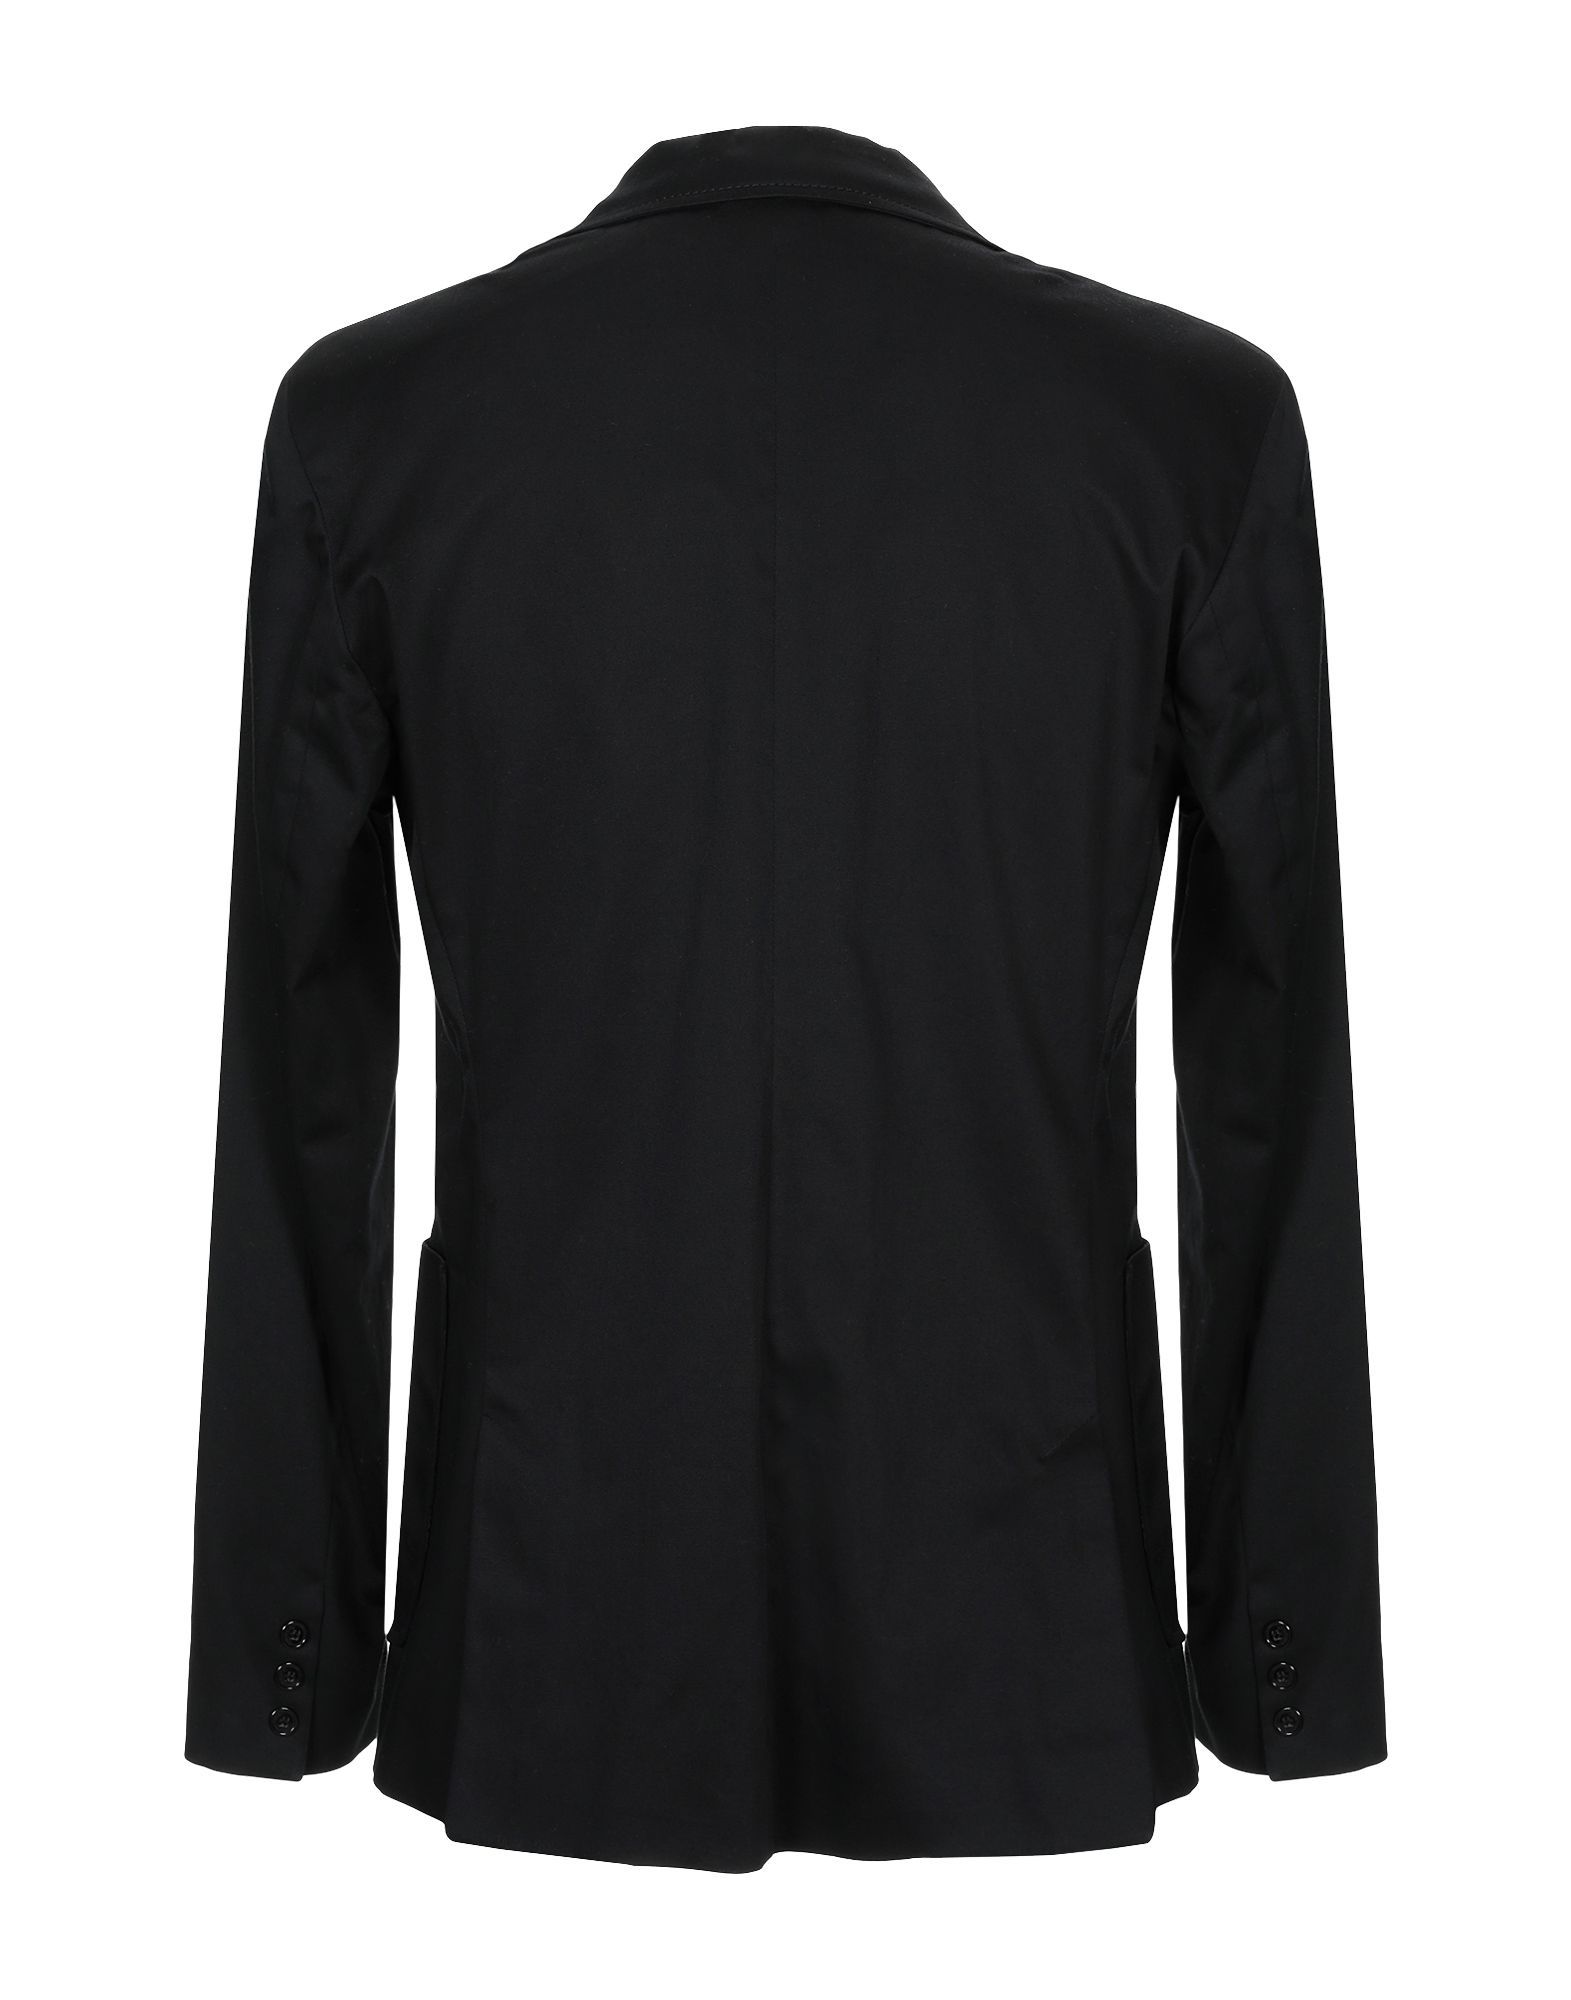 SUITS AND JACKETS Imperial Black Man Cotton